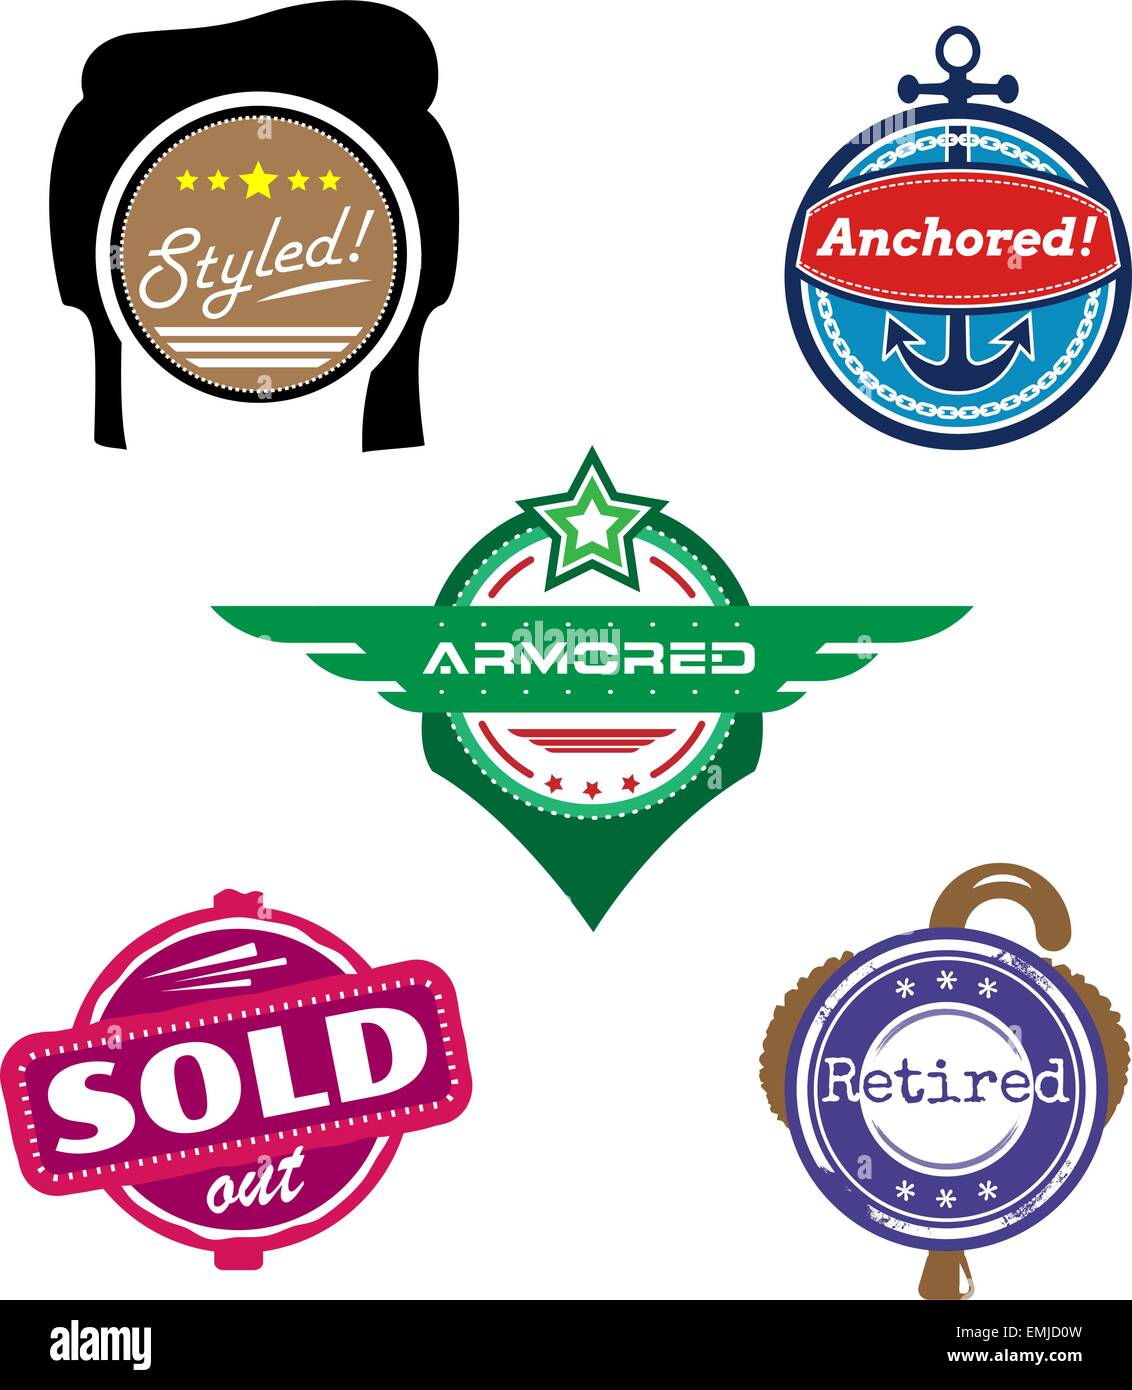 Set of themed vector badges styled retired armored sold anchored Stock Vector